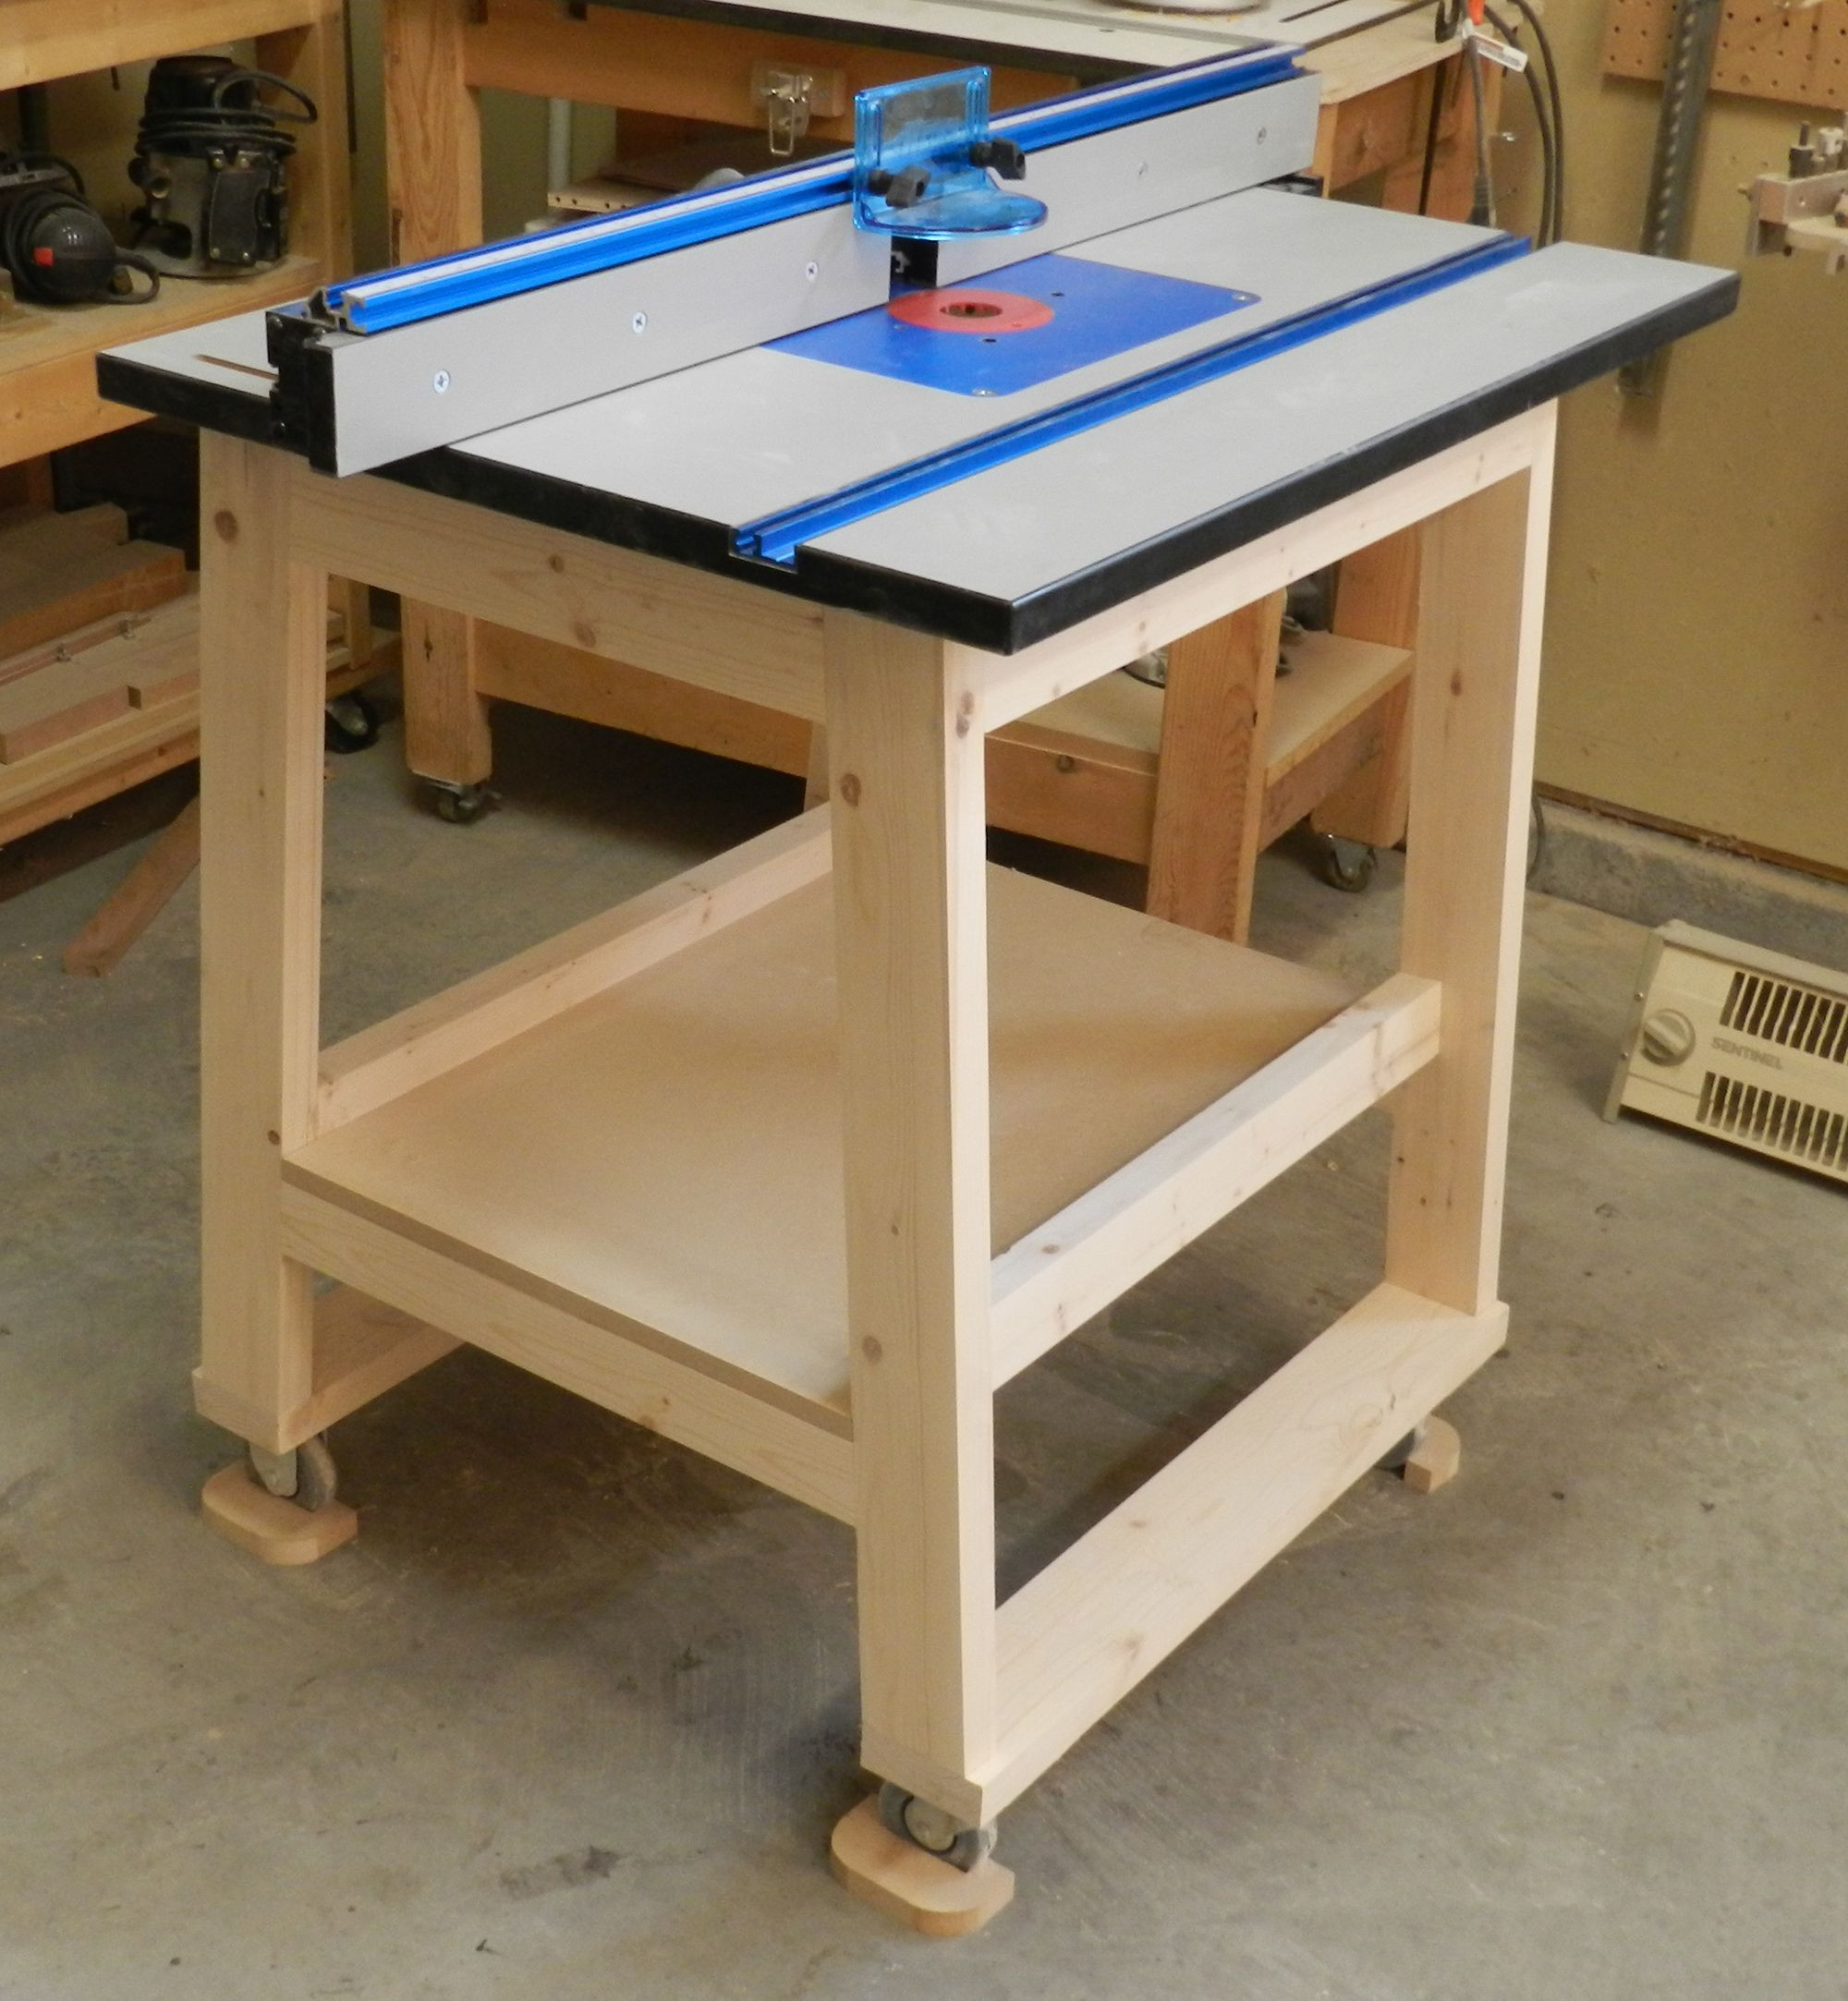 Plans for a simple router table